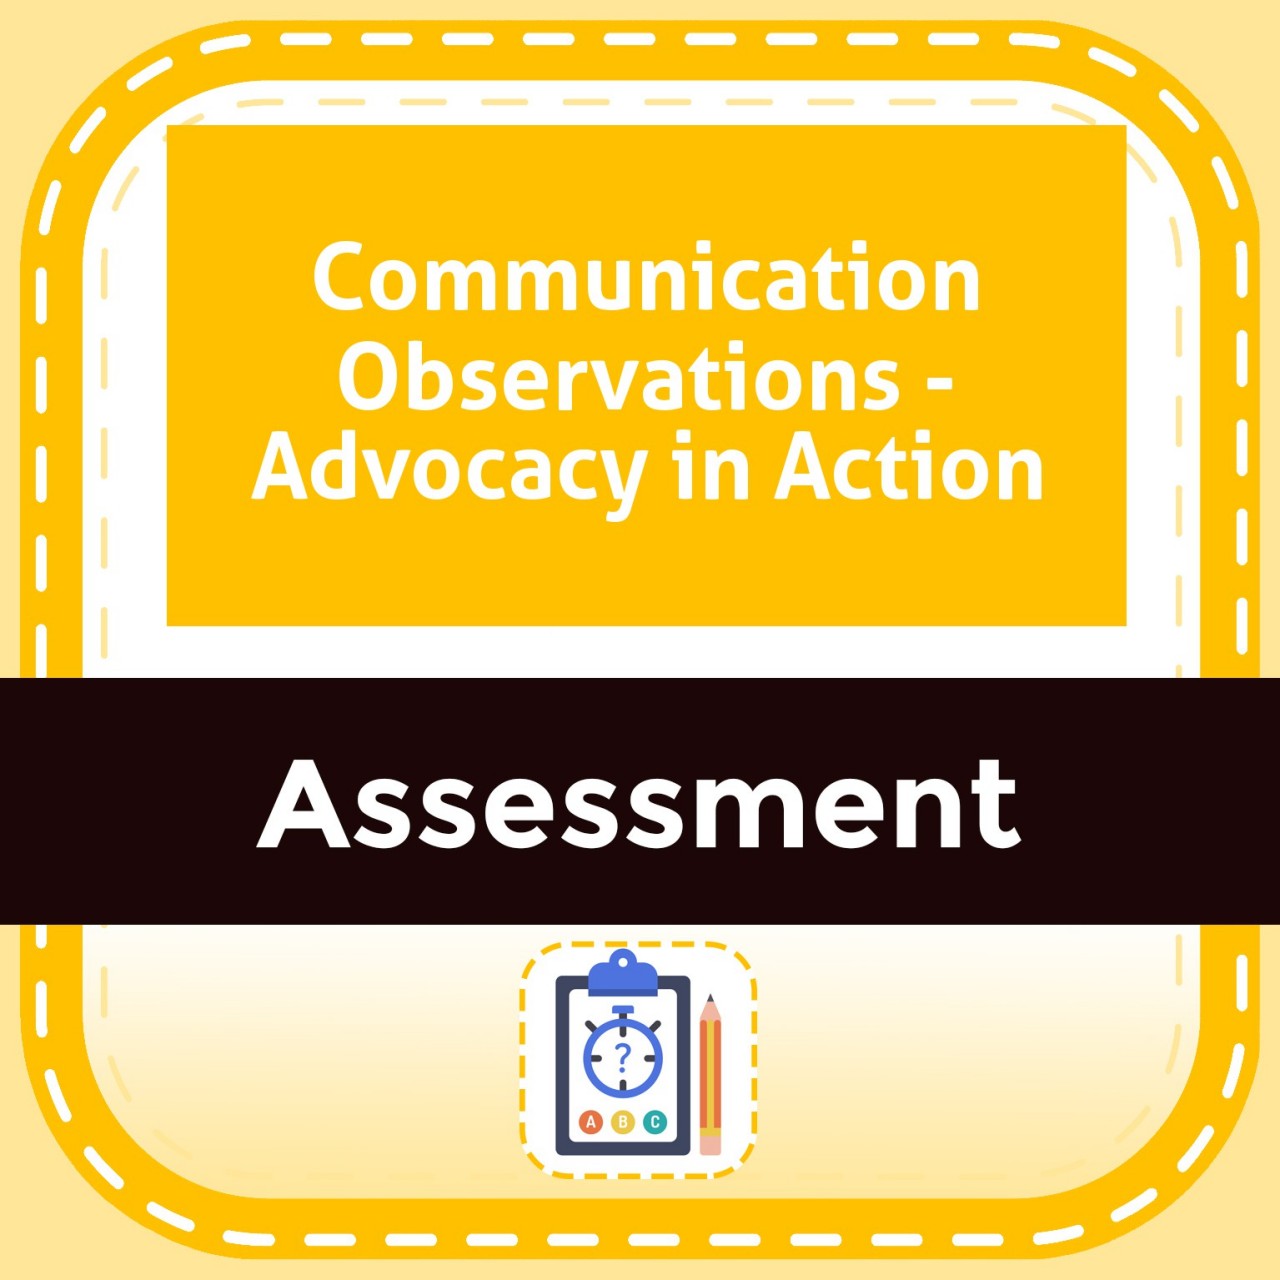 Communication Observations - Advocacy in Action